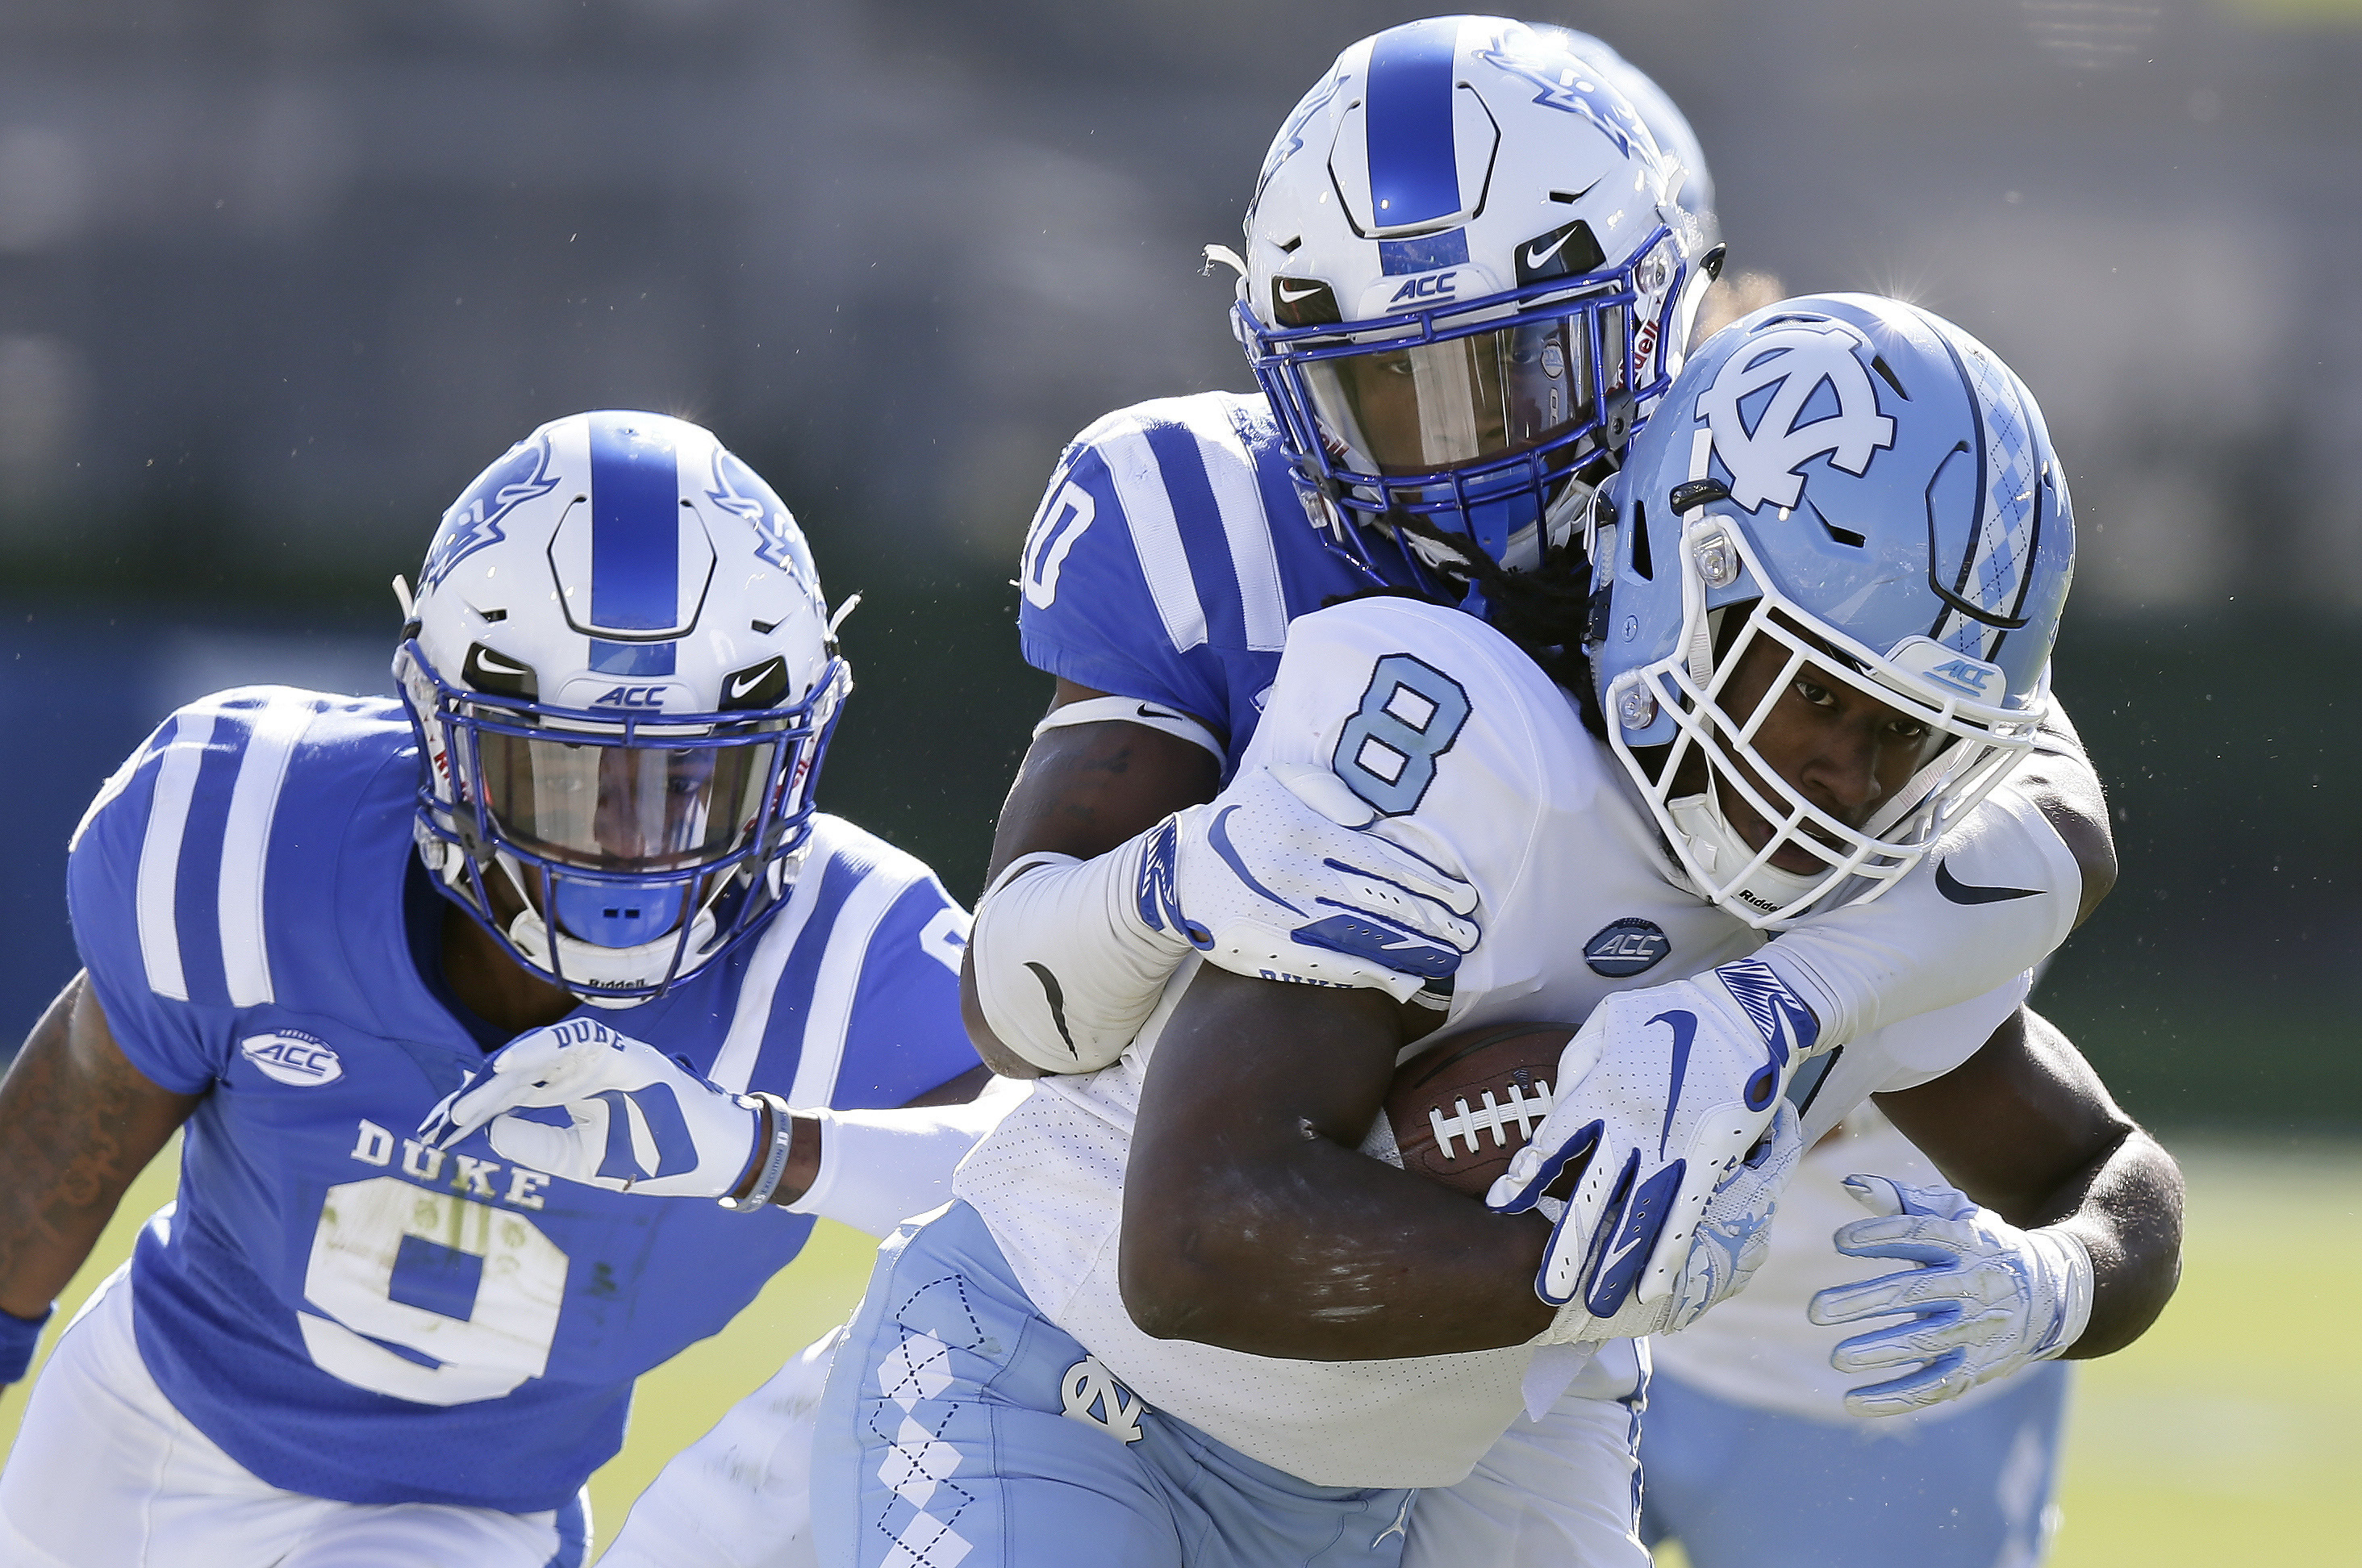 Duke holds off rival UNC 42-35 to keep Victory Bell